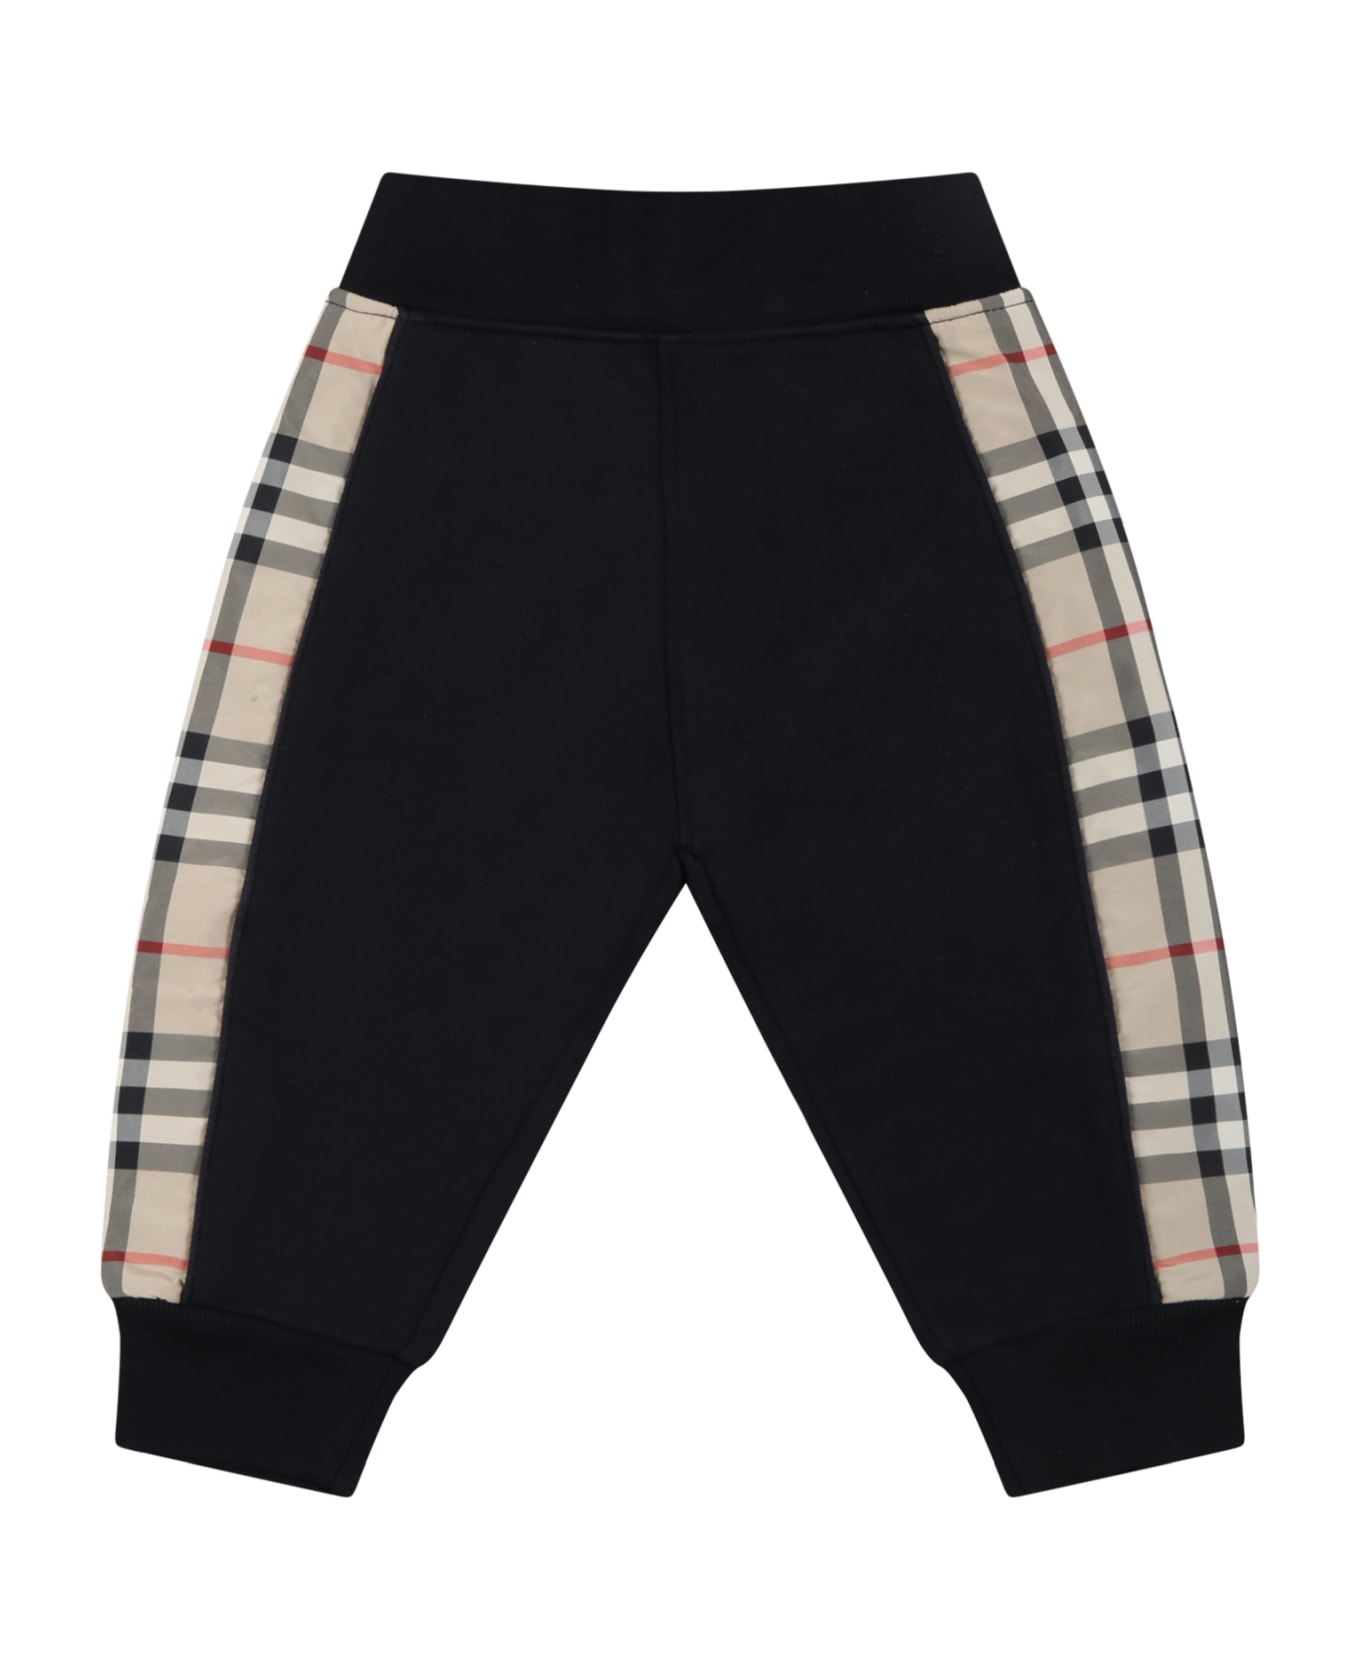 Burberry Black Sweatpants For Babies With Vintage Check - Black